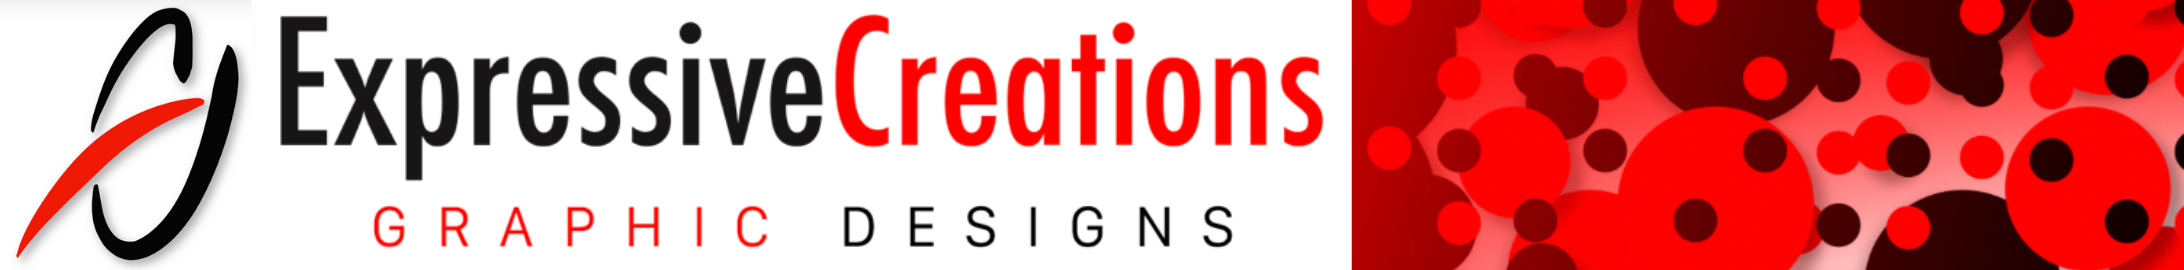 Expressive Creations Graphic Designs